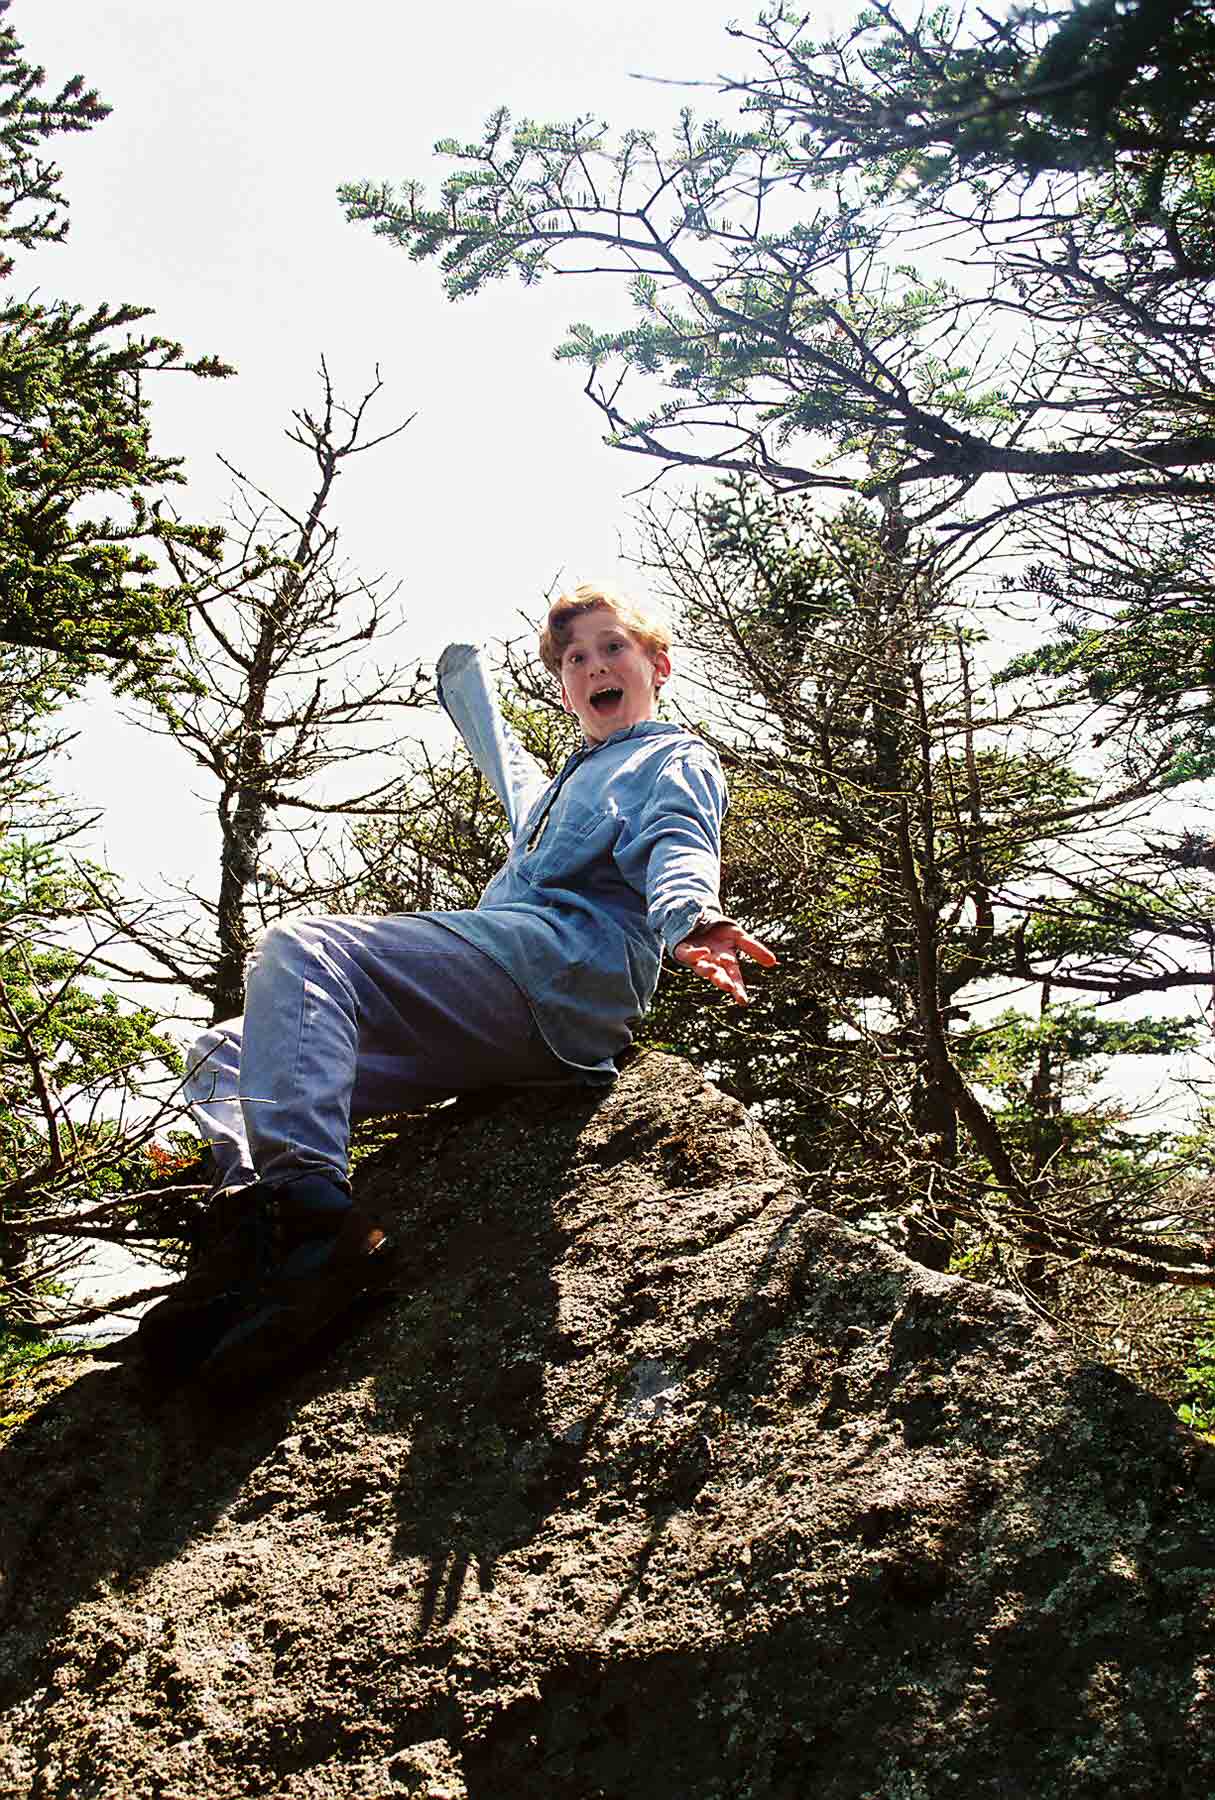 mm 5.4 - My son, Mike, then 13 (1994) on the official summit of North Kinsman Mt. This rock is considered the actual high point of the mountain.  Courtesy dlcul@conncoll.edu